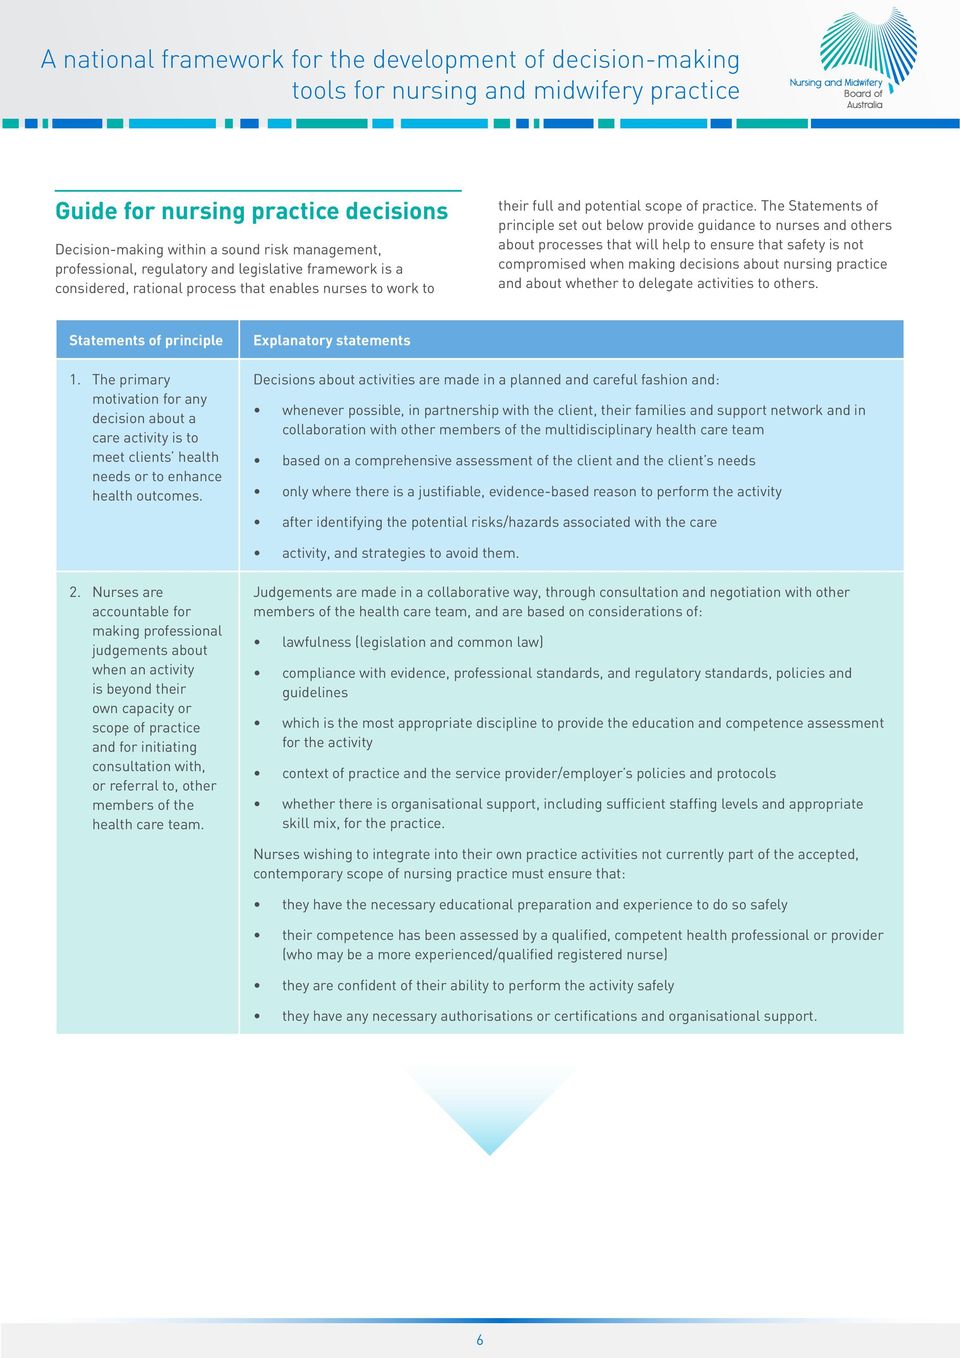 The Statements of principle set out below provide guidance to nurses and others about processes that will help to ensure that safety is not compromised when making decisions about nursing practice